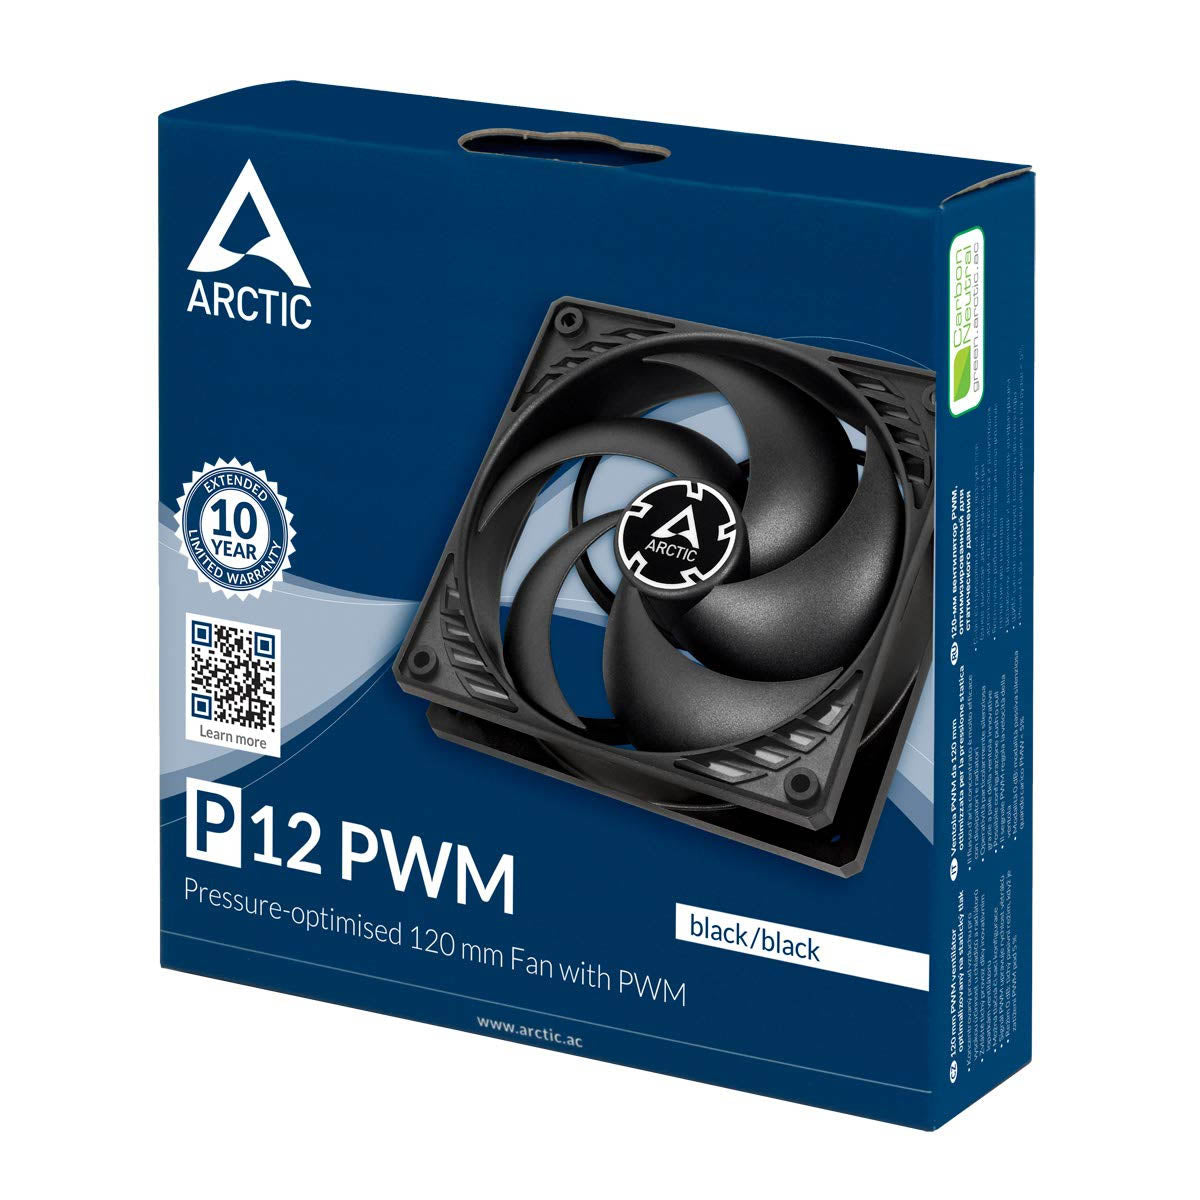 [Repacked]ARCTIC P12 PWM 120mm CPU Case Cooling Fan - Black